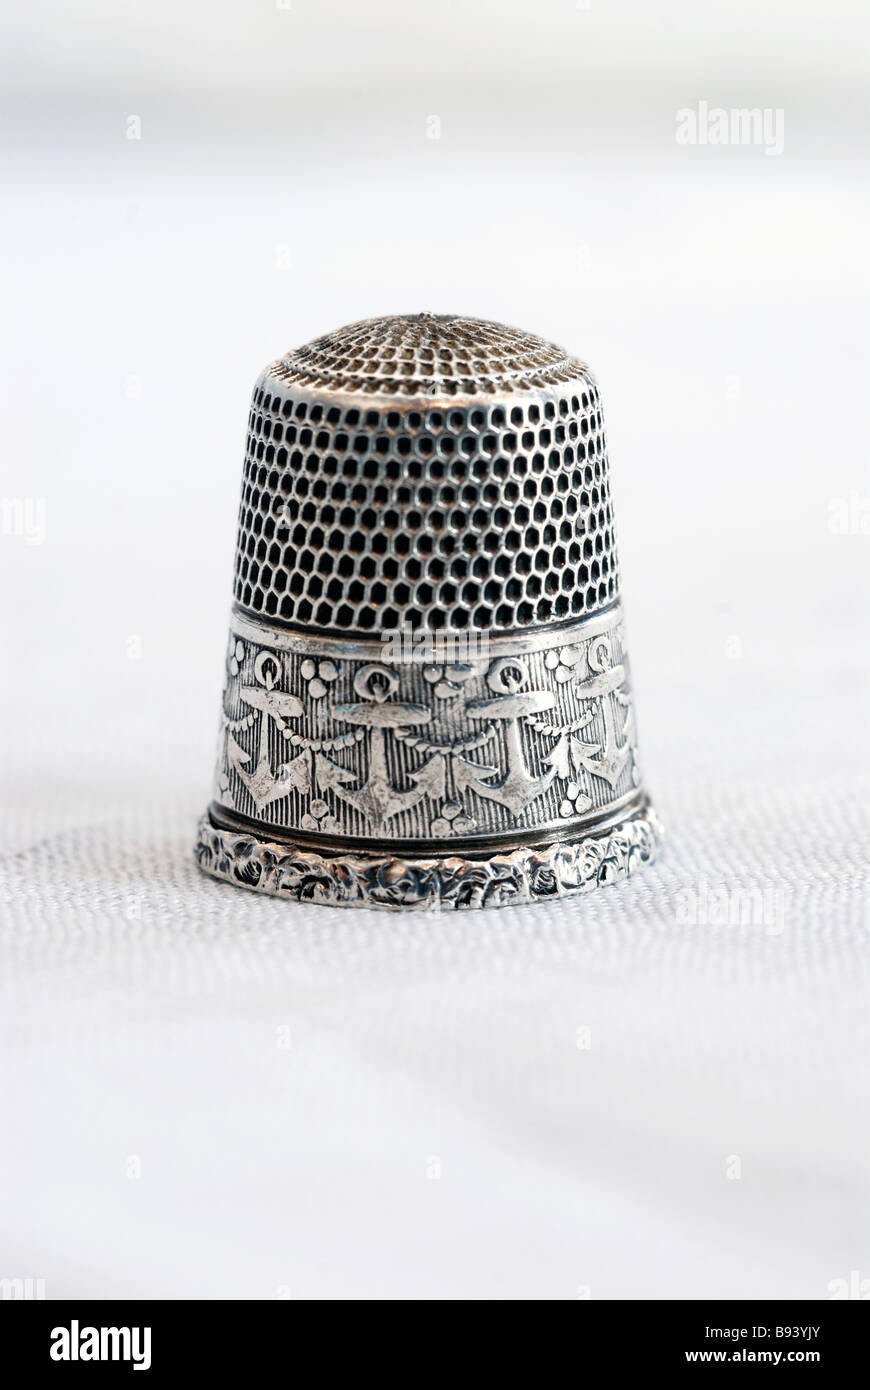 STERLING SILVER THIMBLE WITH WEDGWOOD CAMEO HALLMARKED SILVER THIMBLE 